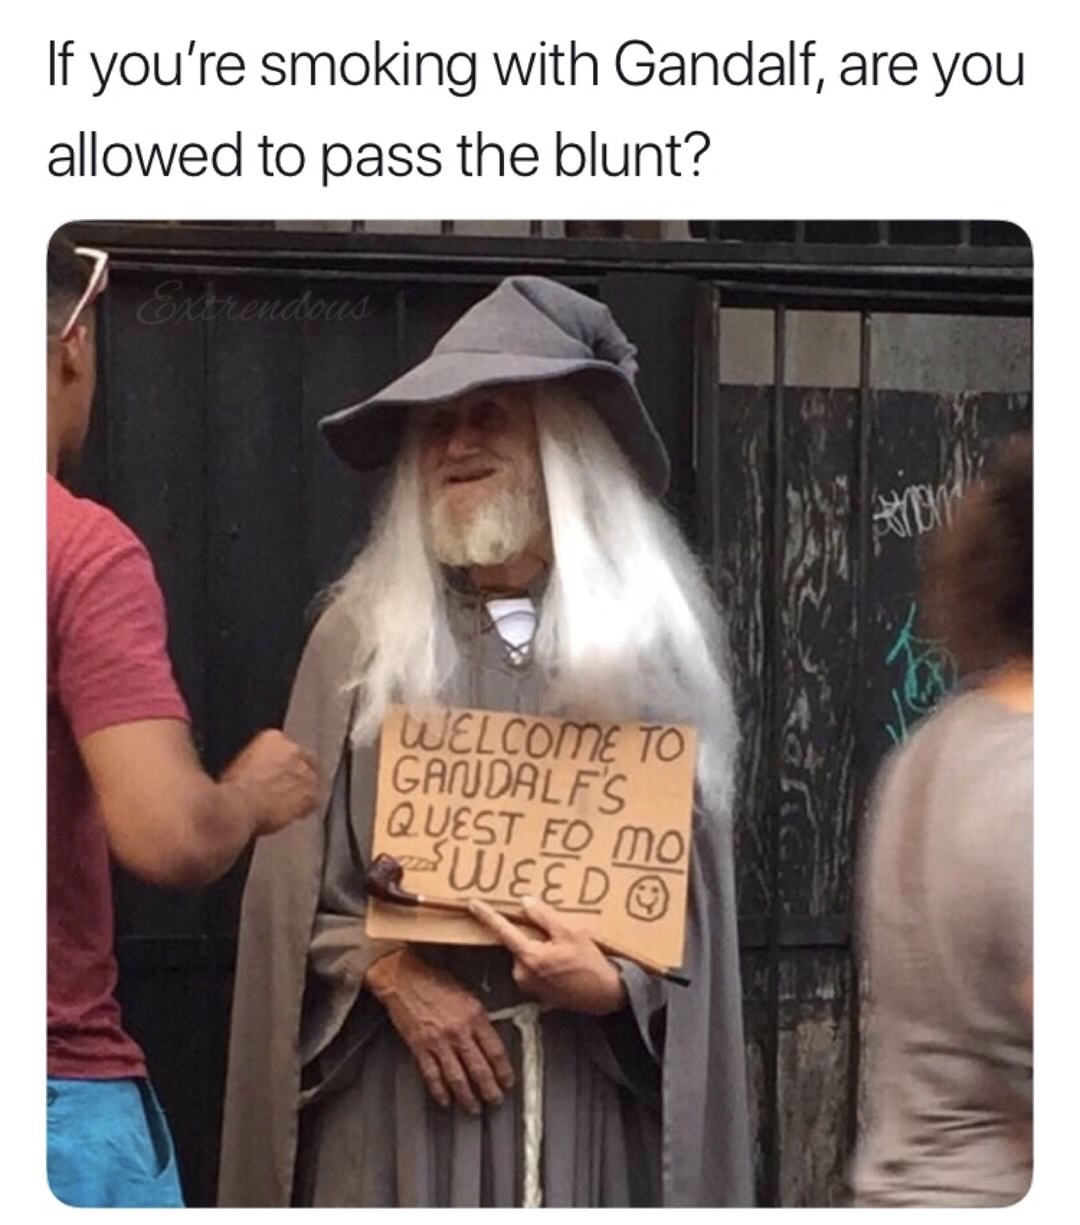 ganjalf the green - If you're smoking with Gandalf, are you allowed to pass the blunt? Errendous Welcome To Gandalfs Quest Fo Mo Weed